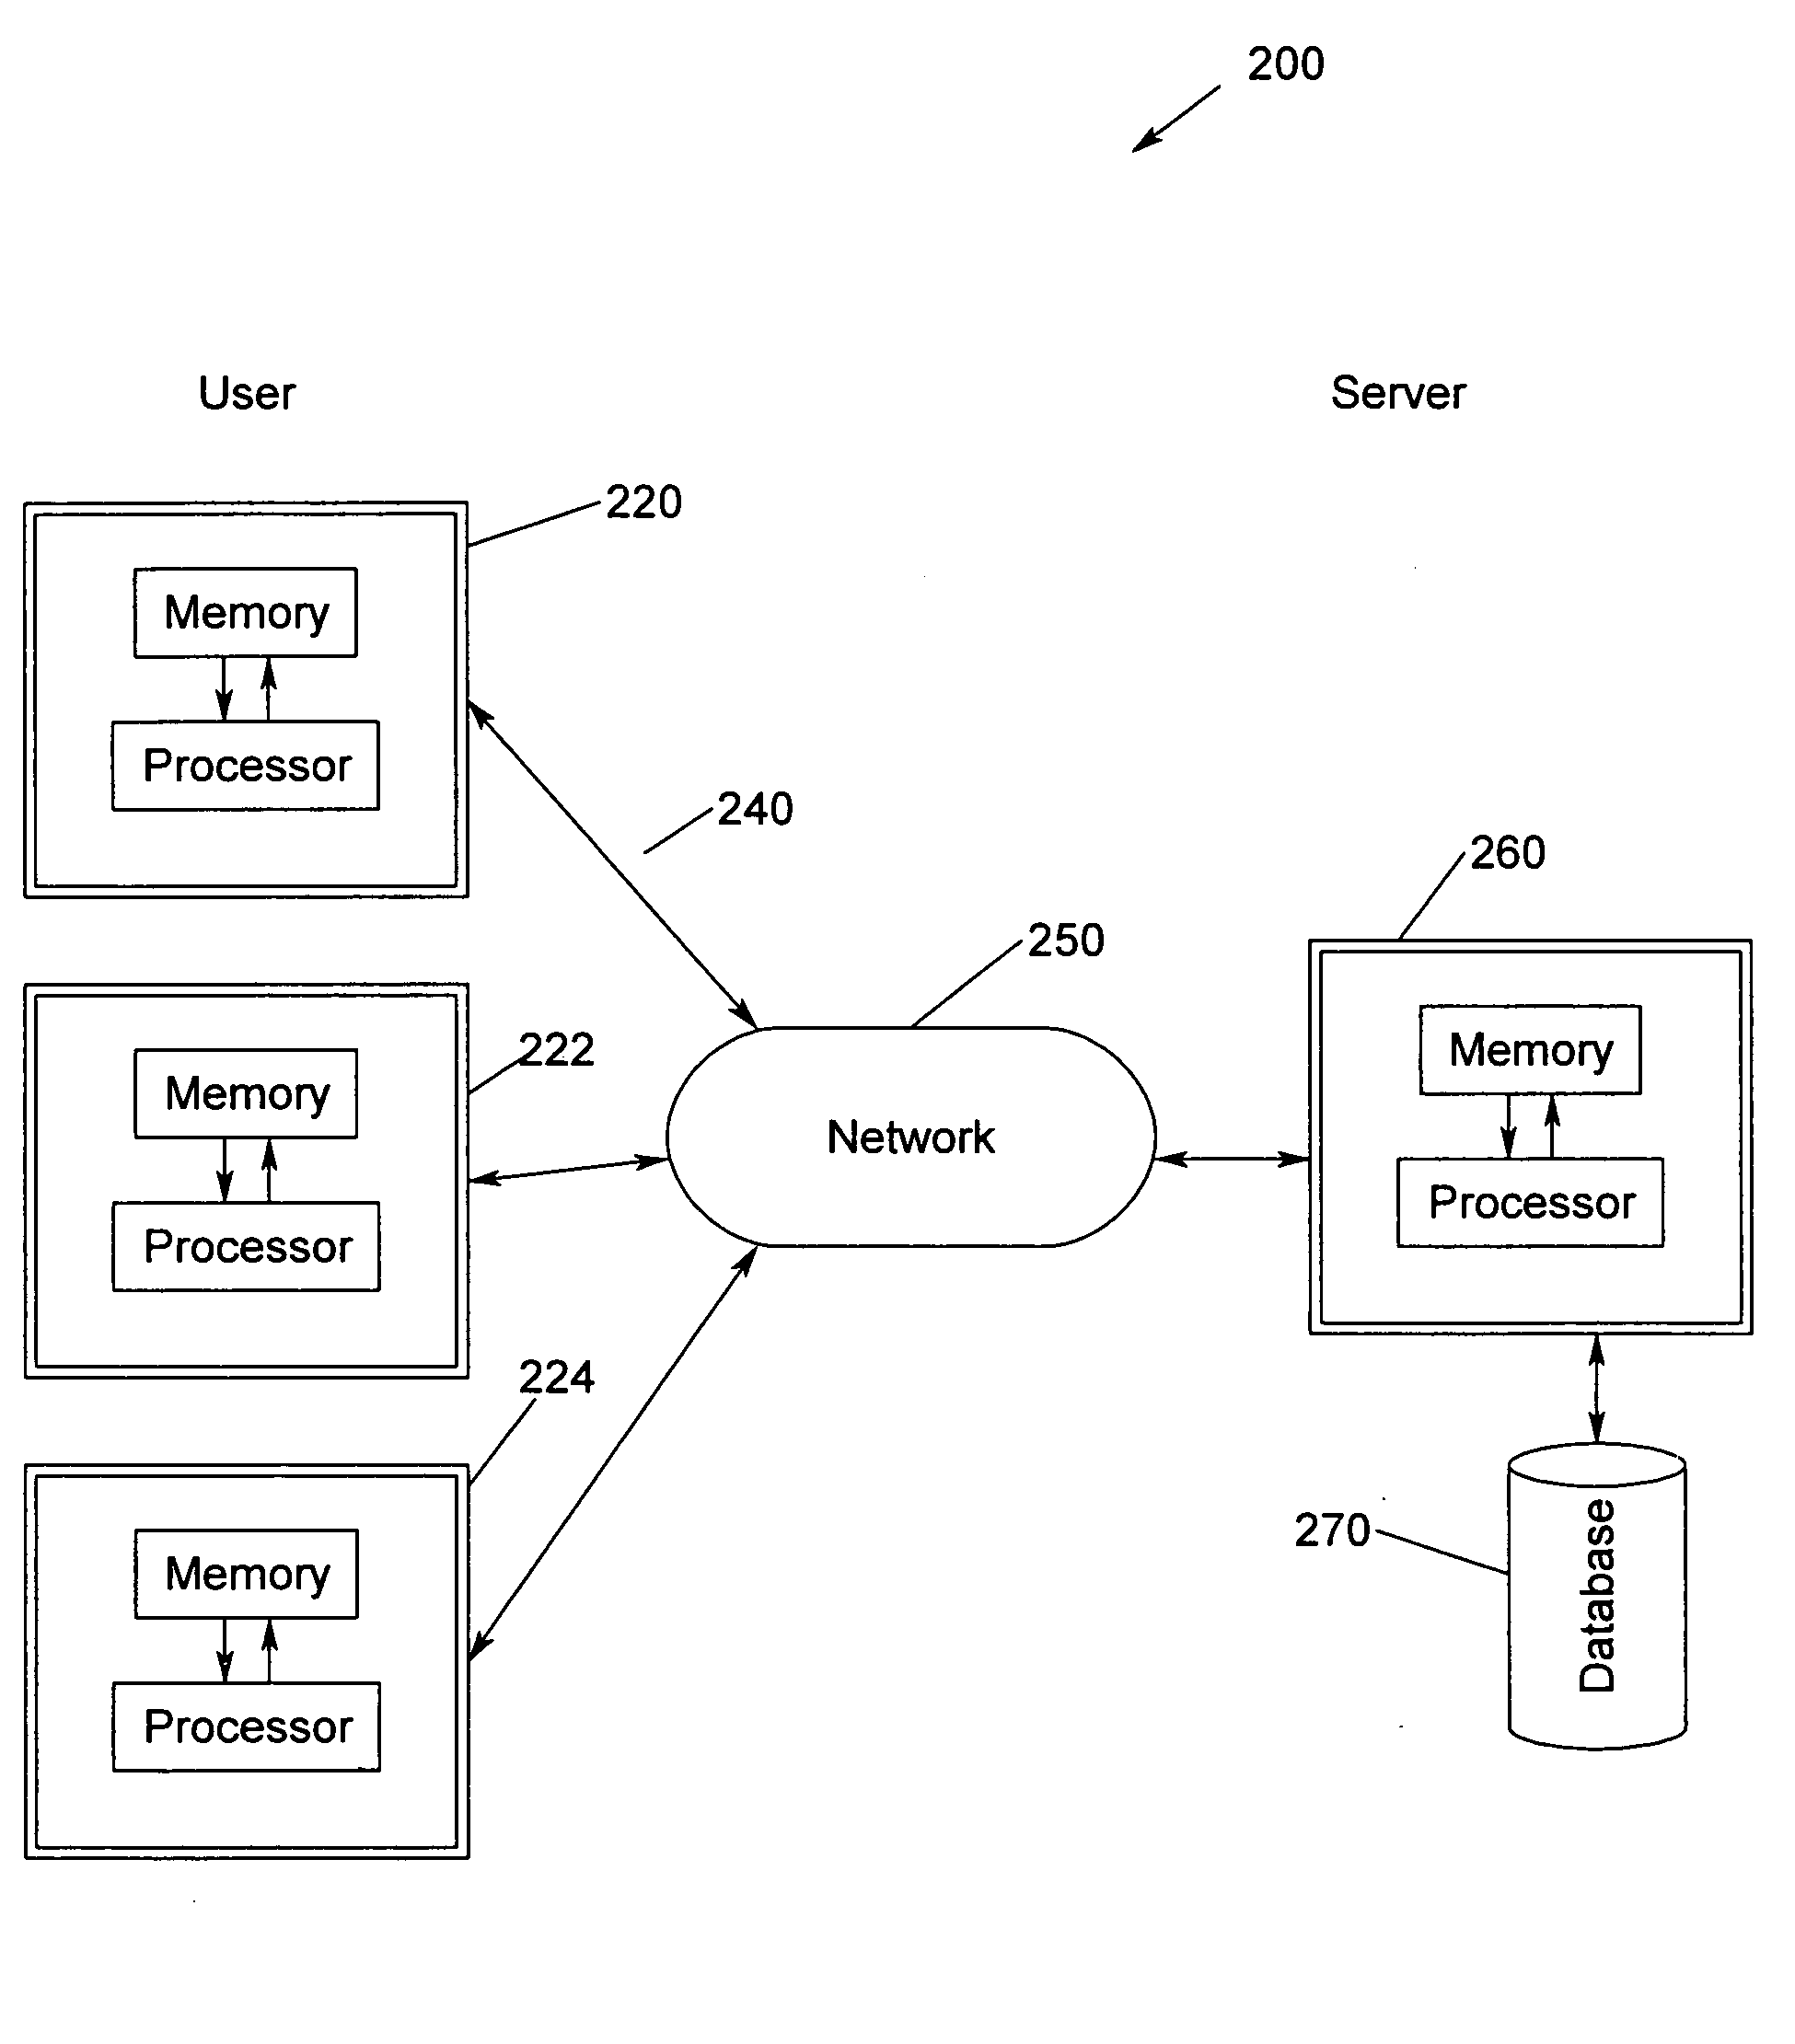 System and method for creating, tracking and analyzing tasks